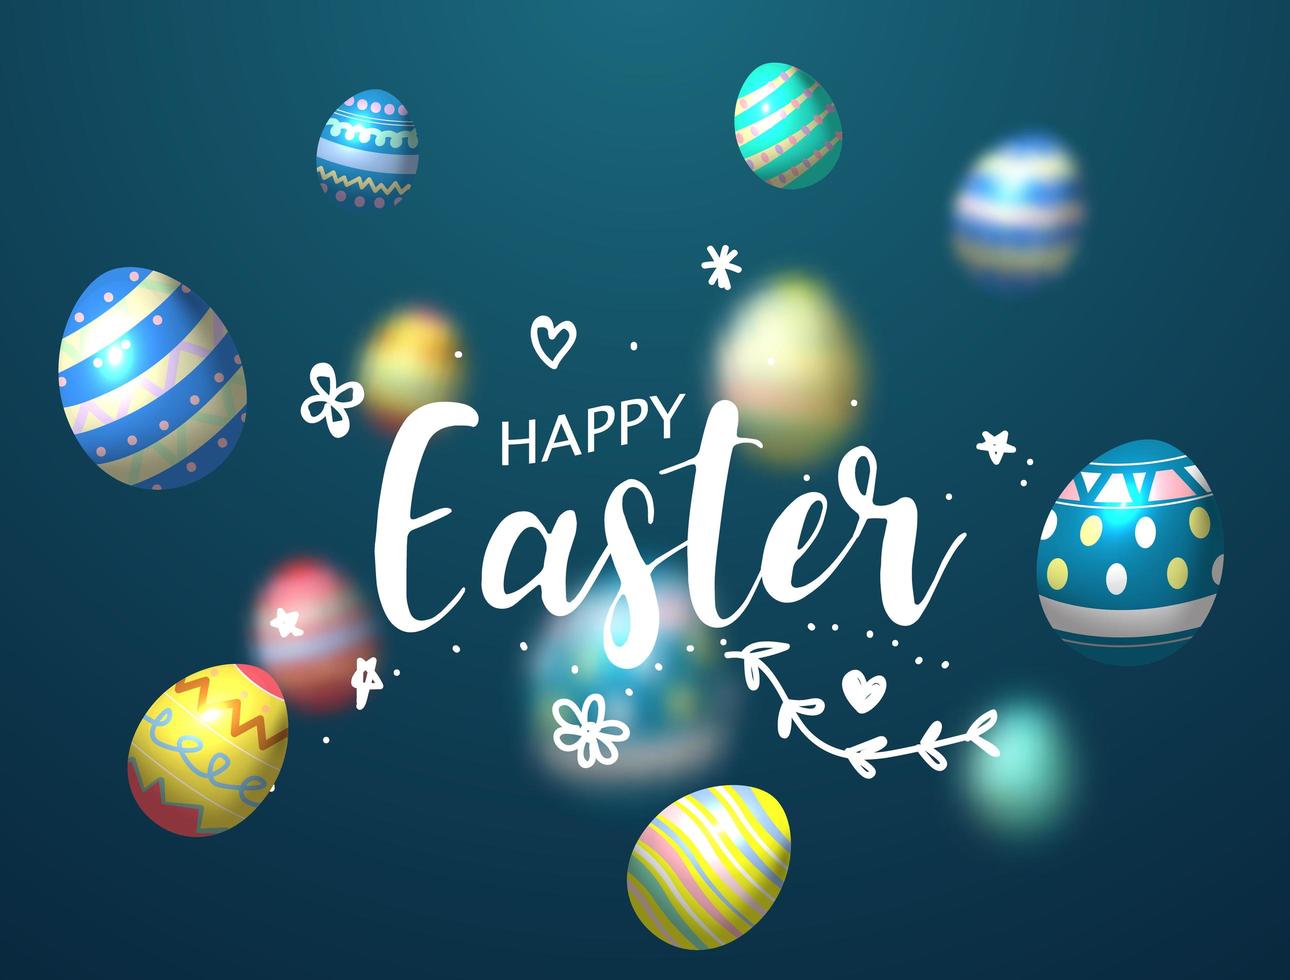 Happy easter background with shiny decorated eggs vector